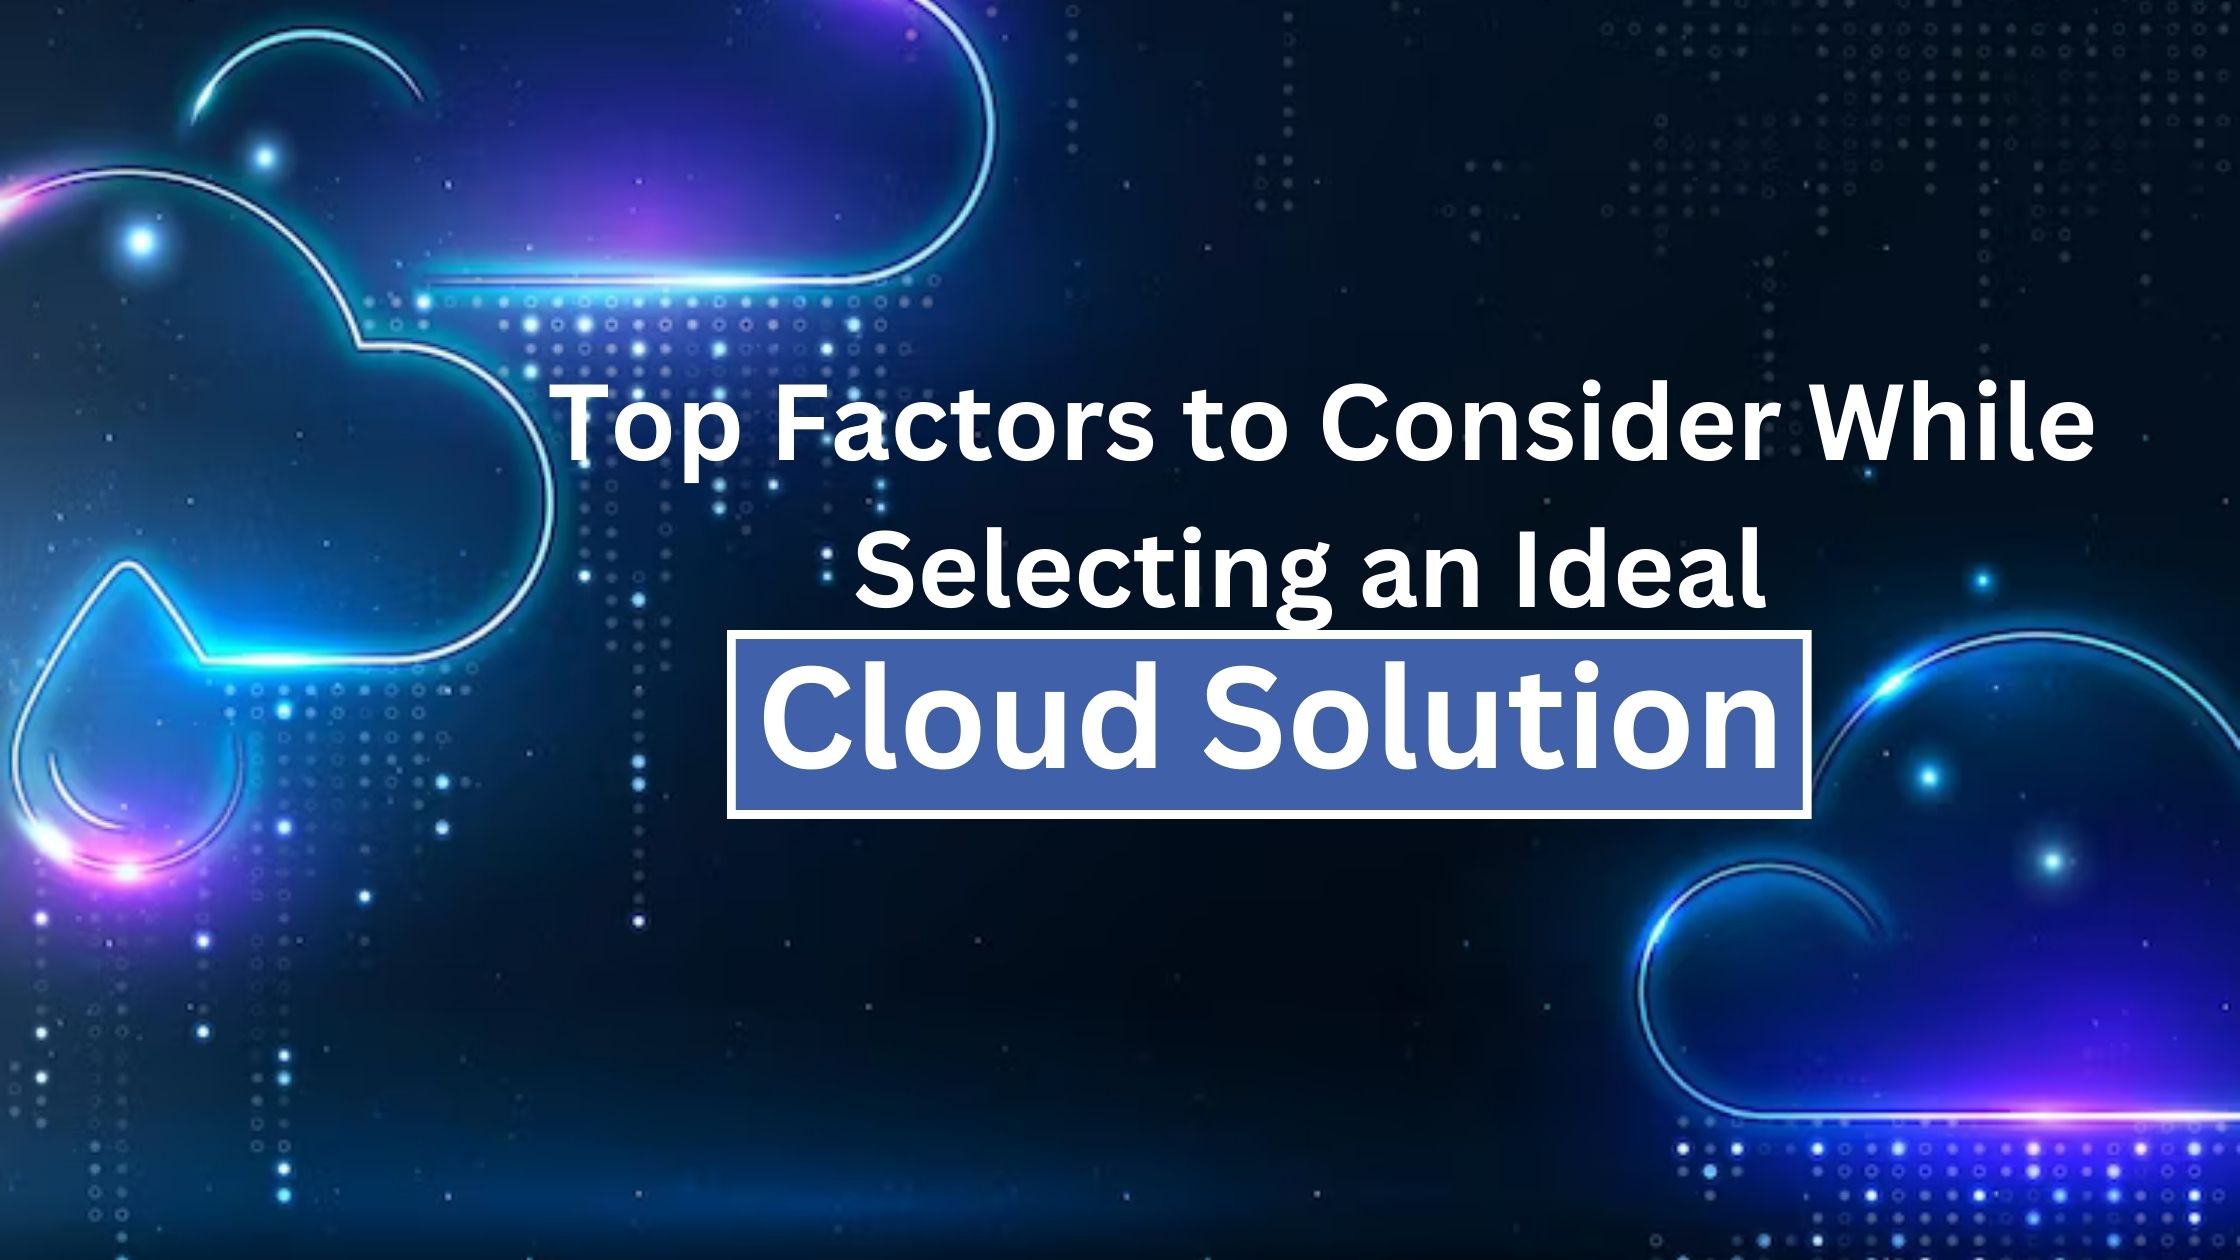 Top Factors to Consider While Selecting an Ideal Cloud Solution